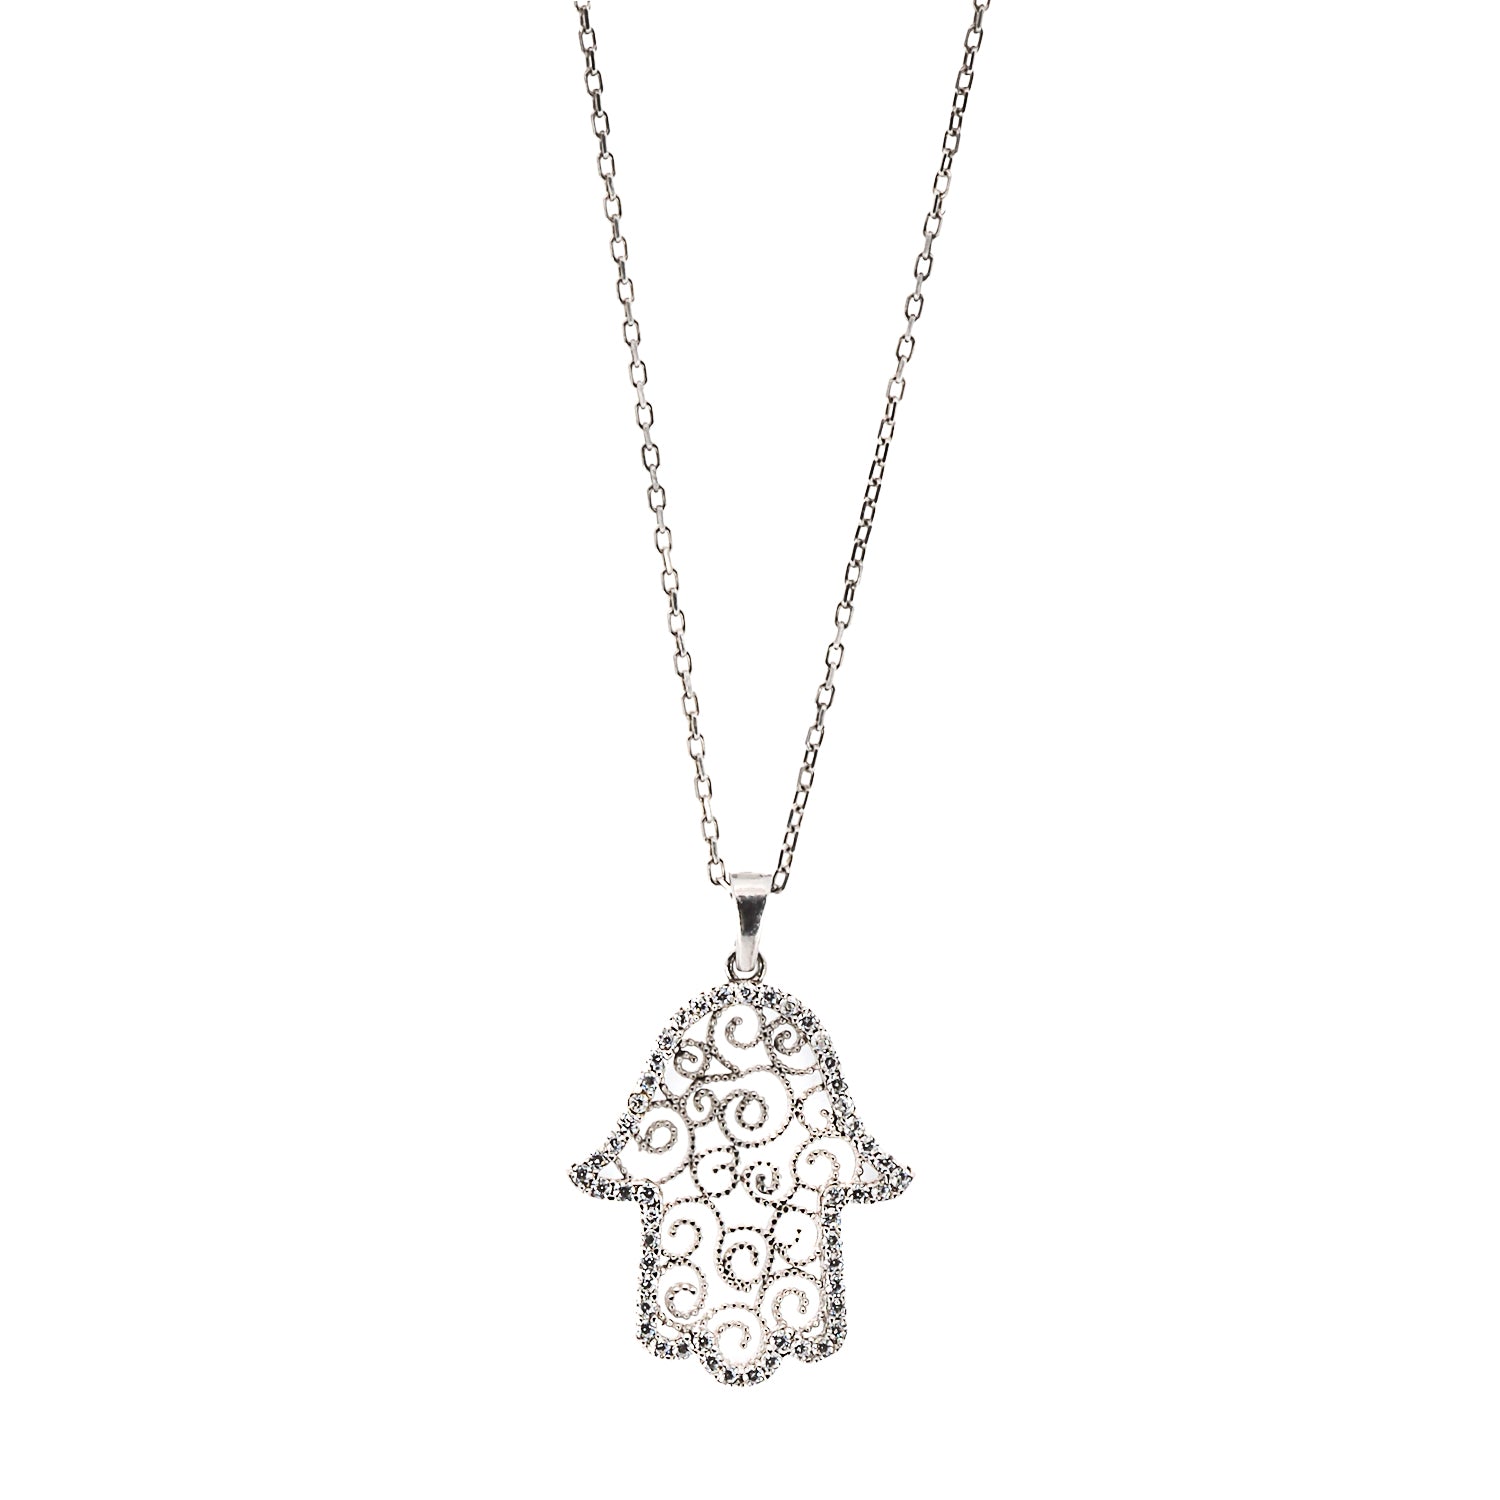 Embrace the spiritual protection and elegance of the Spiral Hamsa Necklace, featuring a beautifully crafted Hamsa pendant adorned with CZ diamonds on a sterling silver chain.